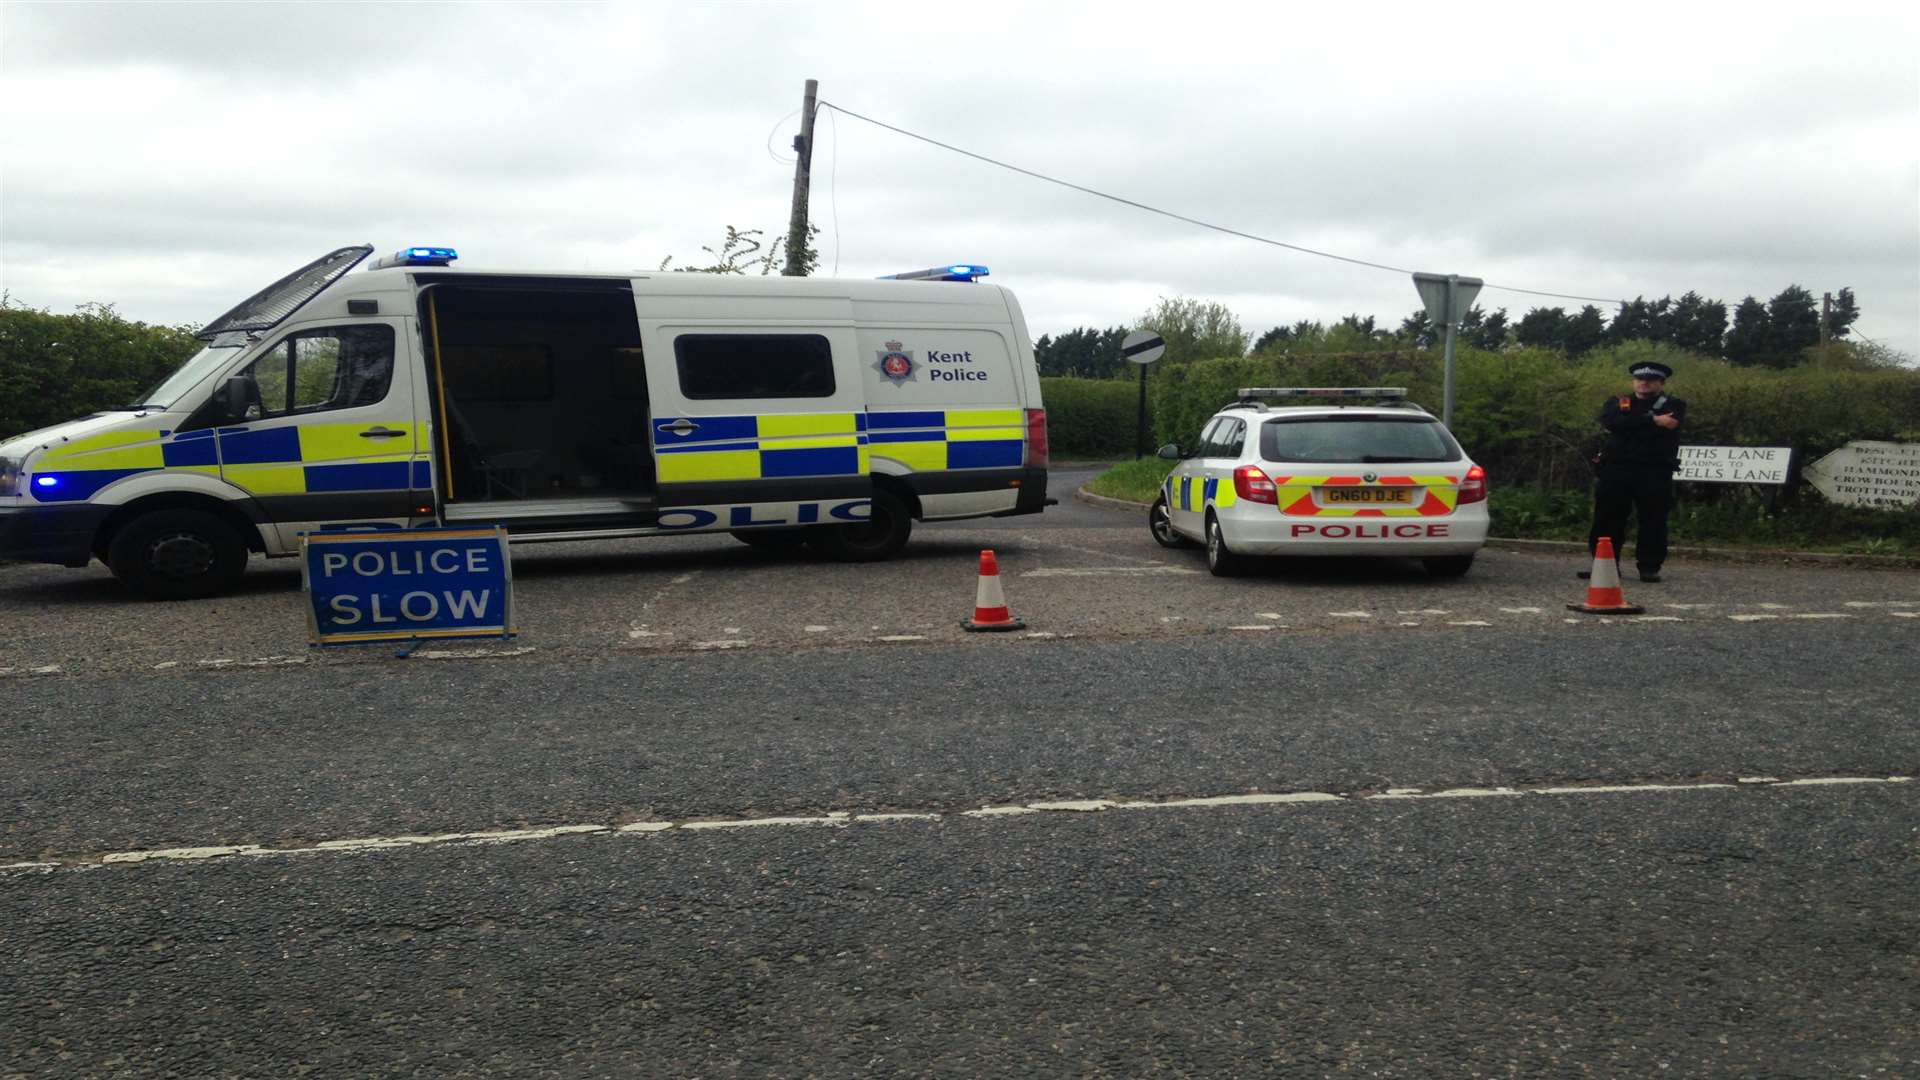 Smiths Lane was closed while investigations took place